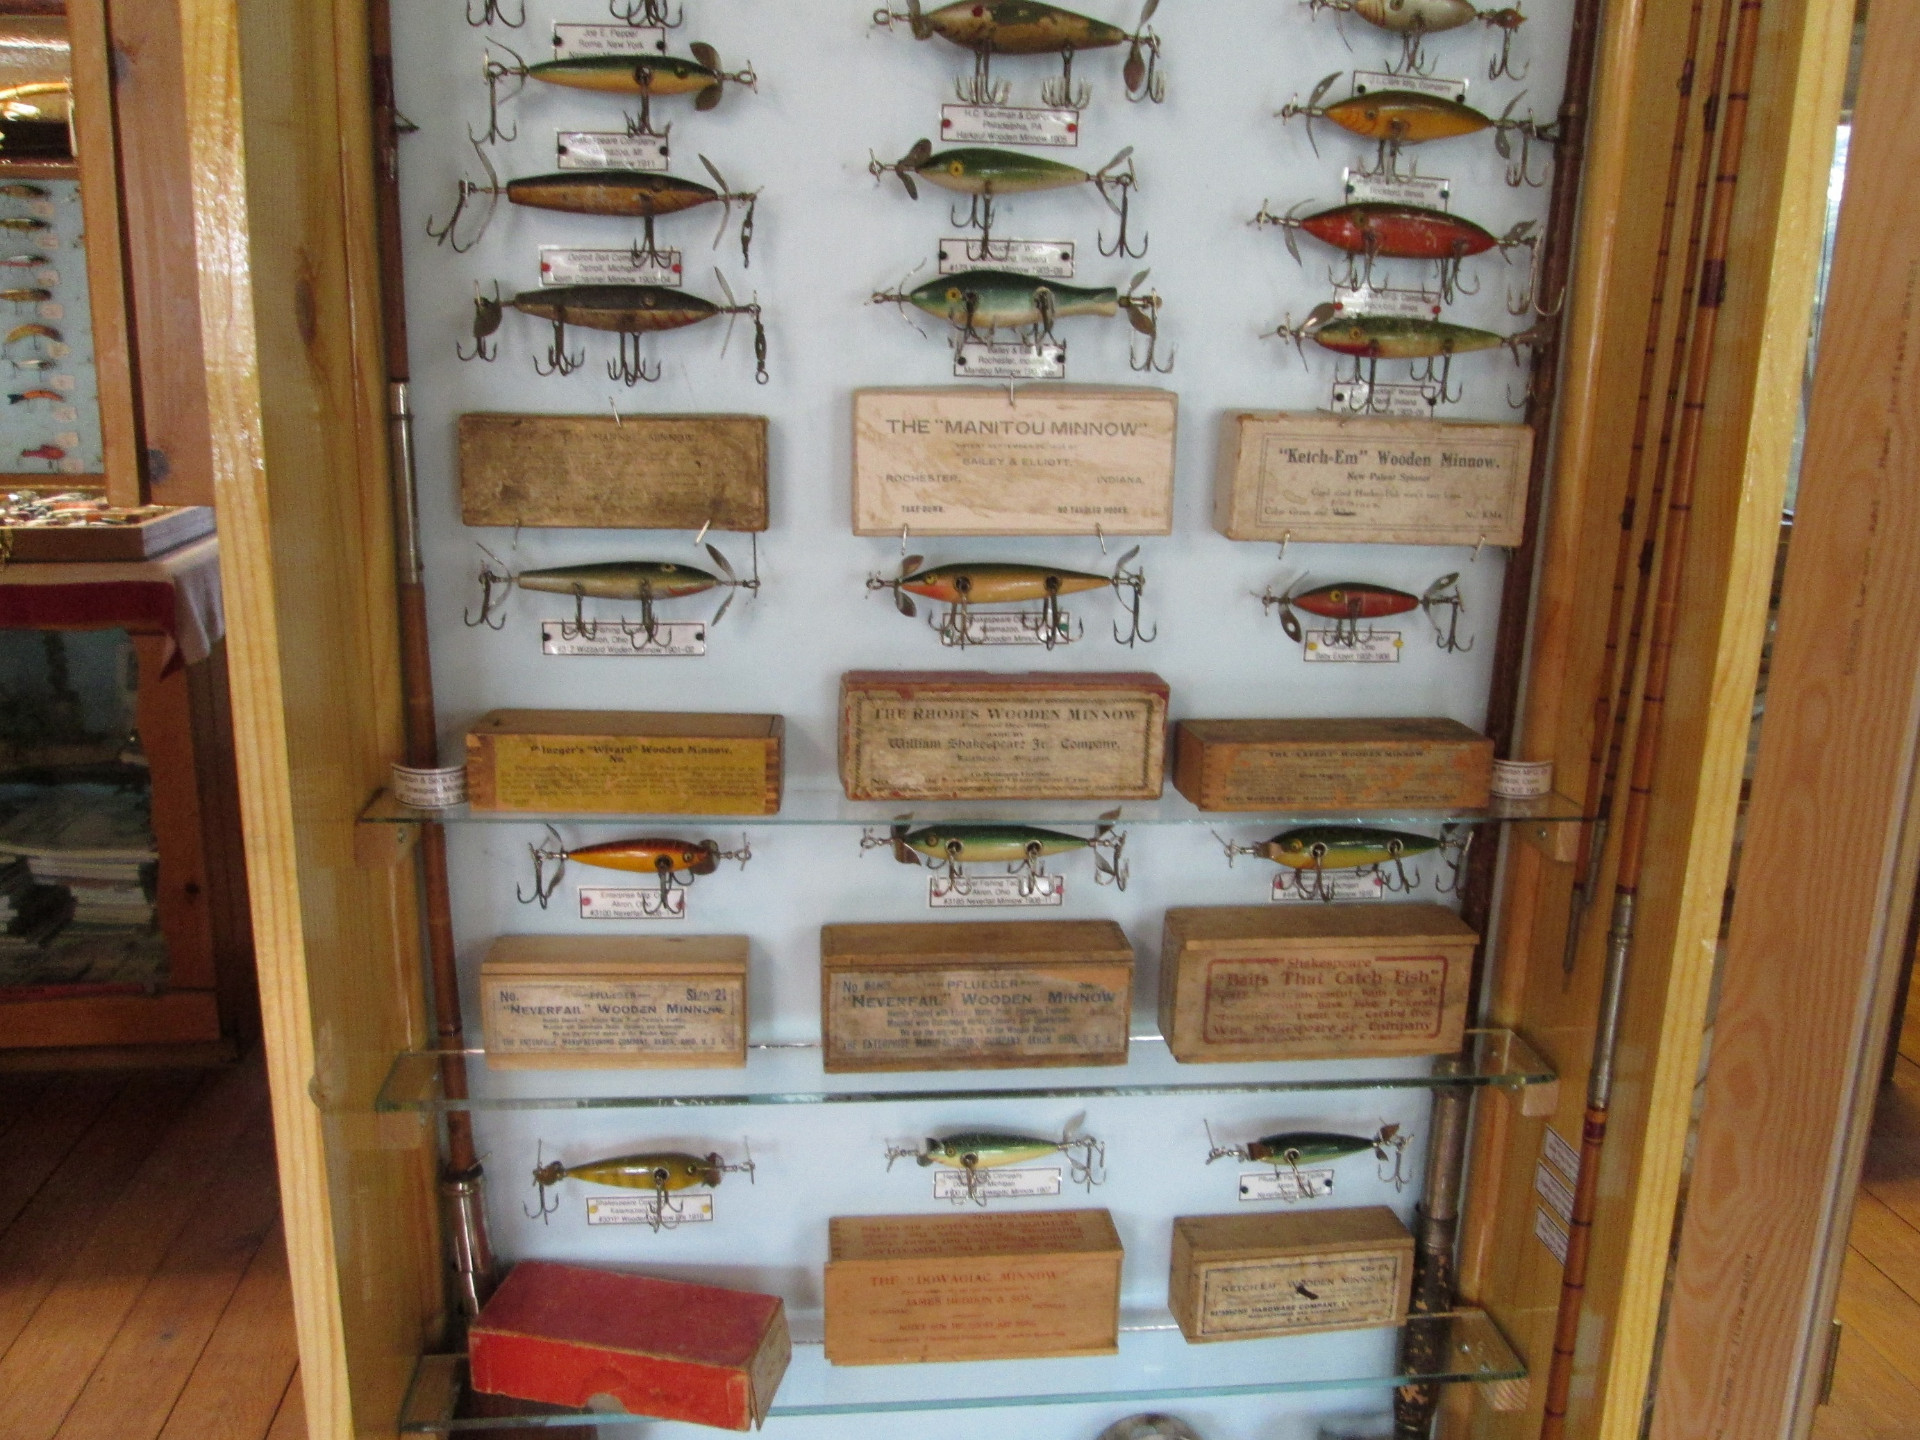 Tall Pines Motel & Antique Fishing Lures